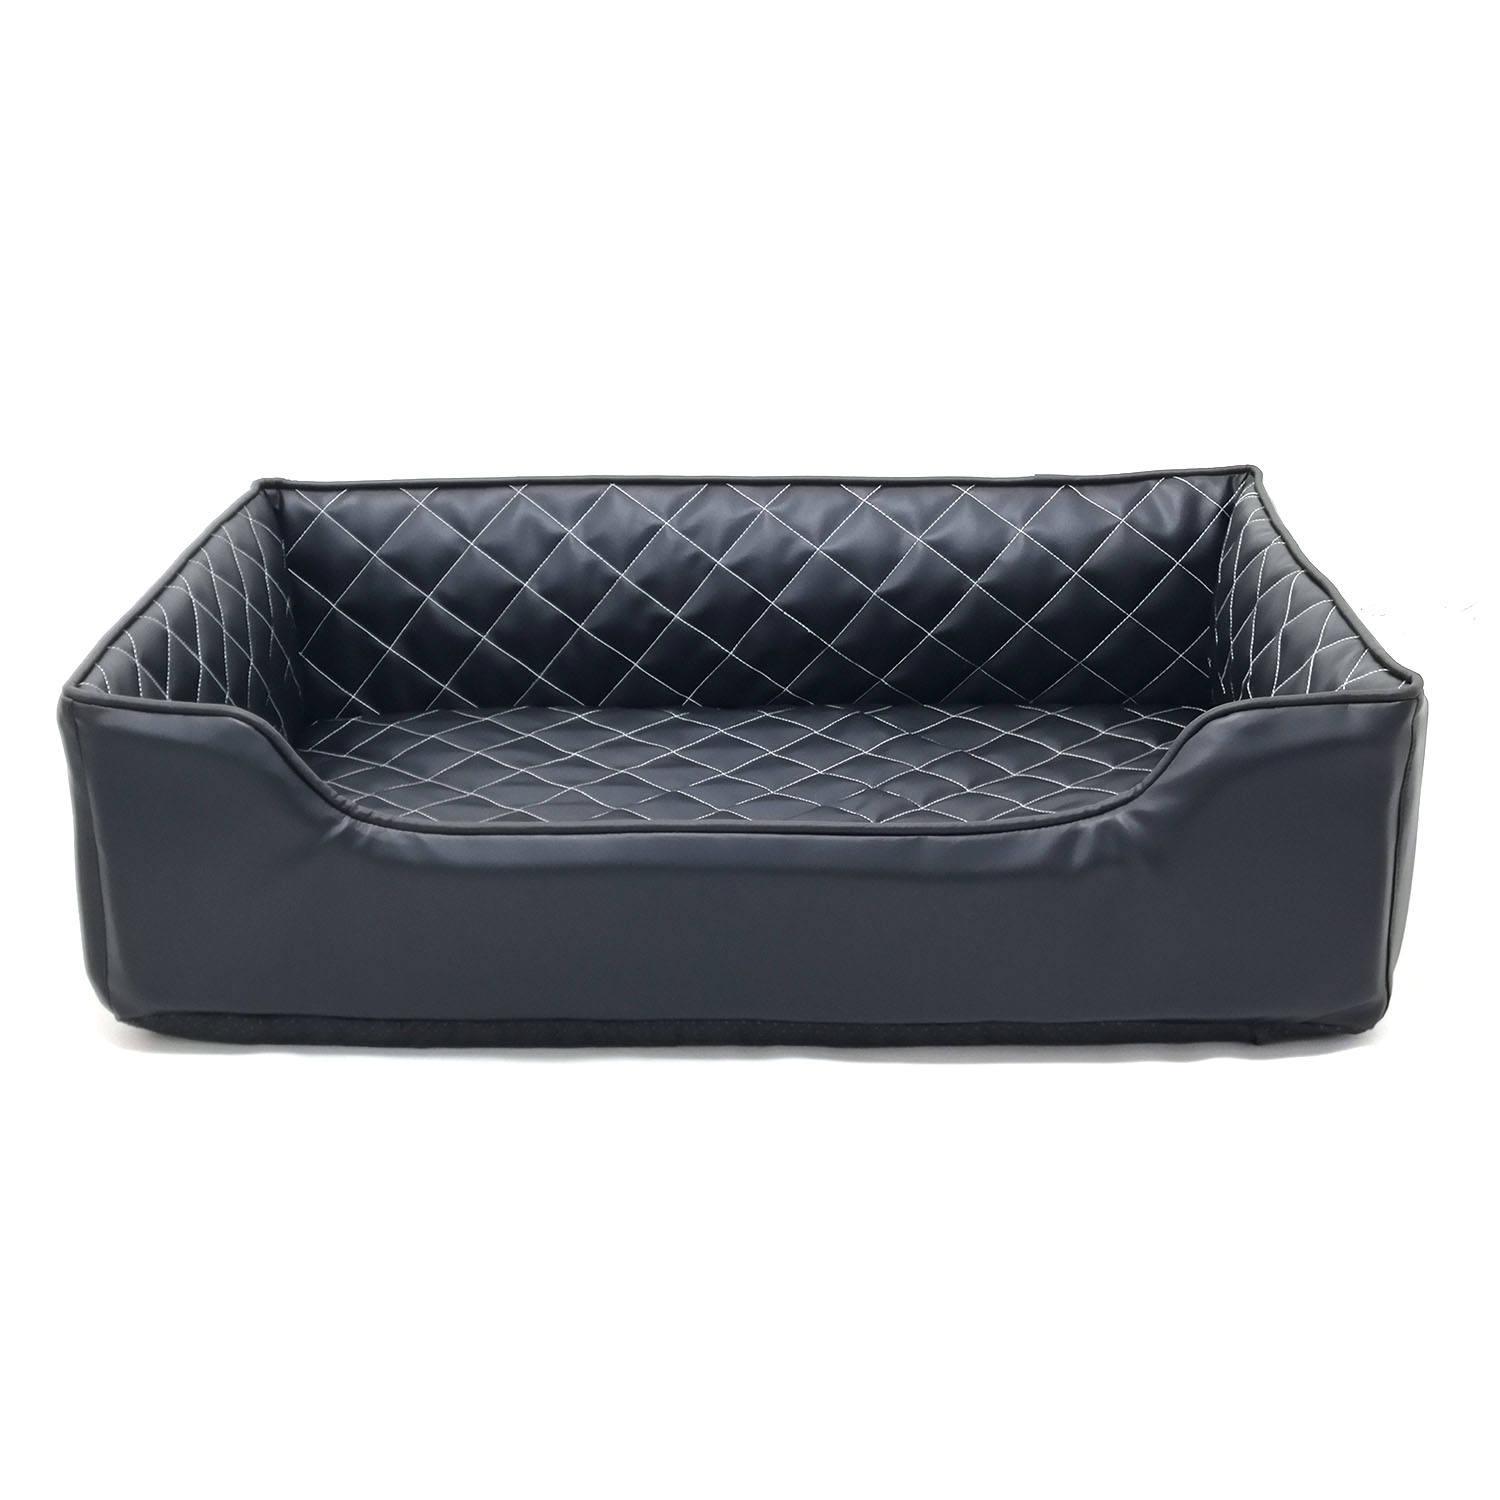 pet Luxury Dog Bed Crate Matt Leather For Dogs Washable Memory Foam Leather Bed For Large Dog